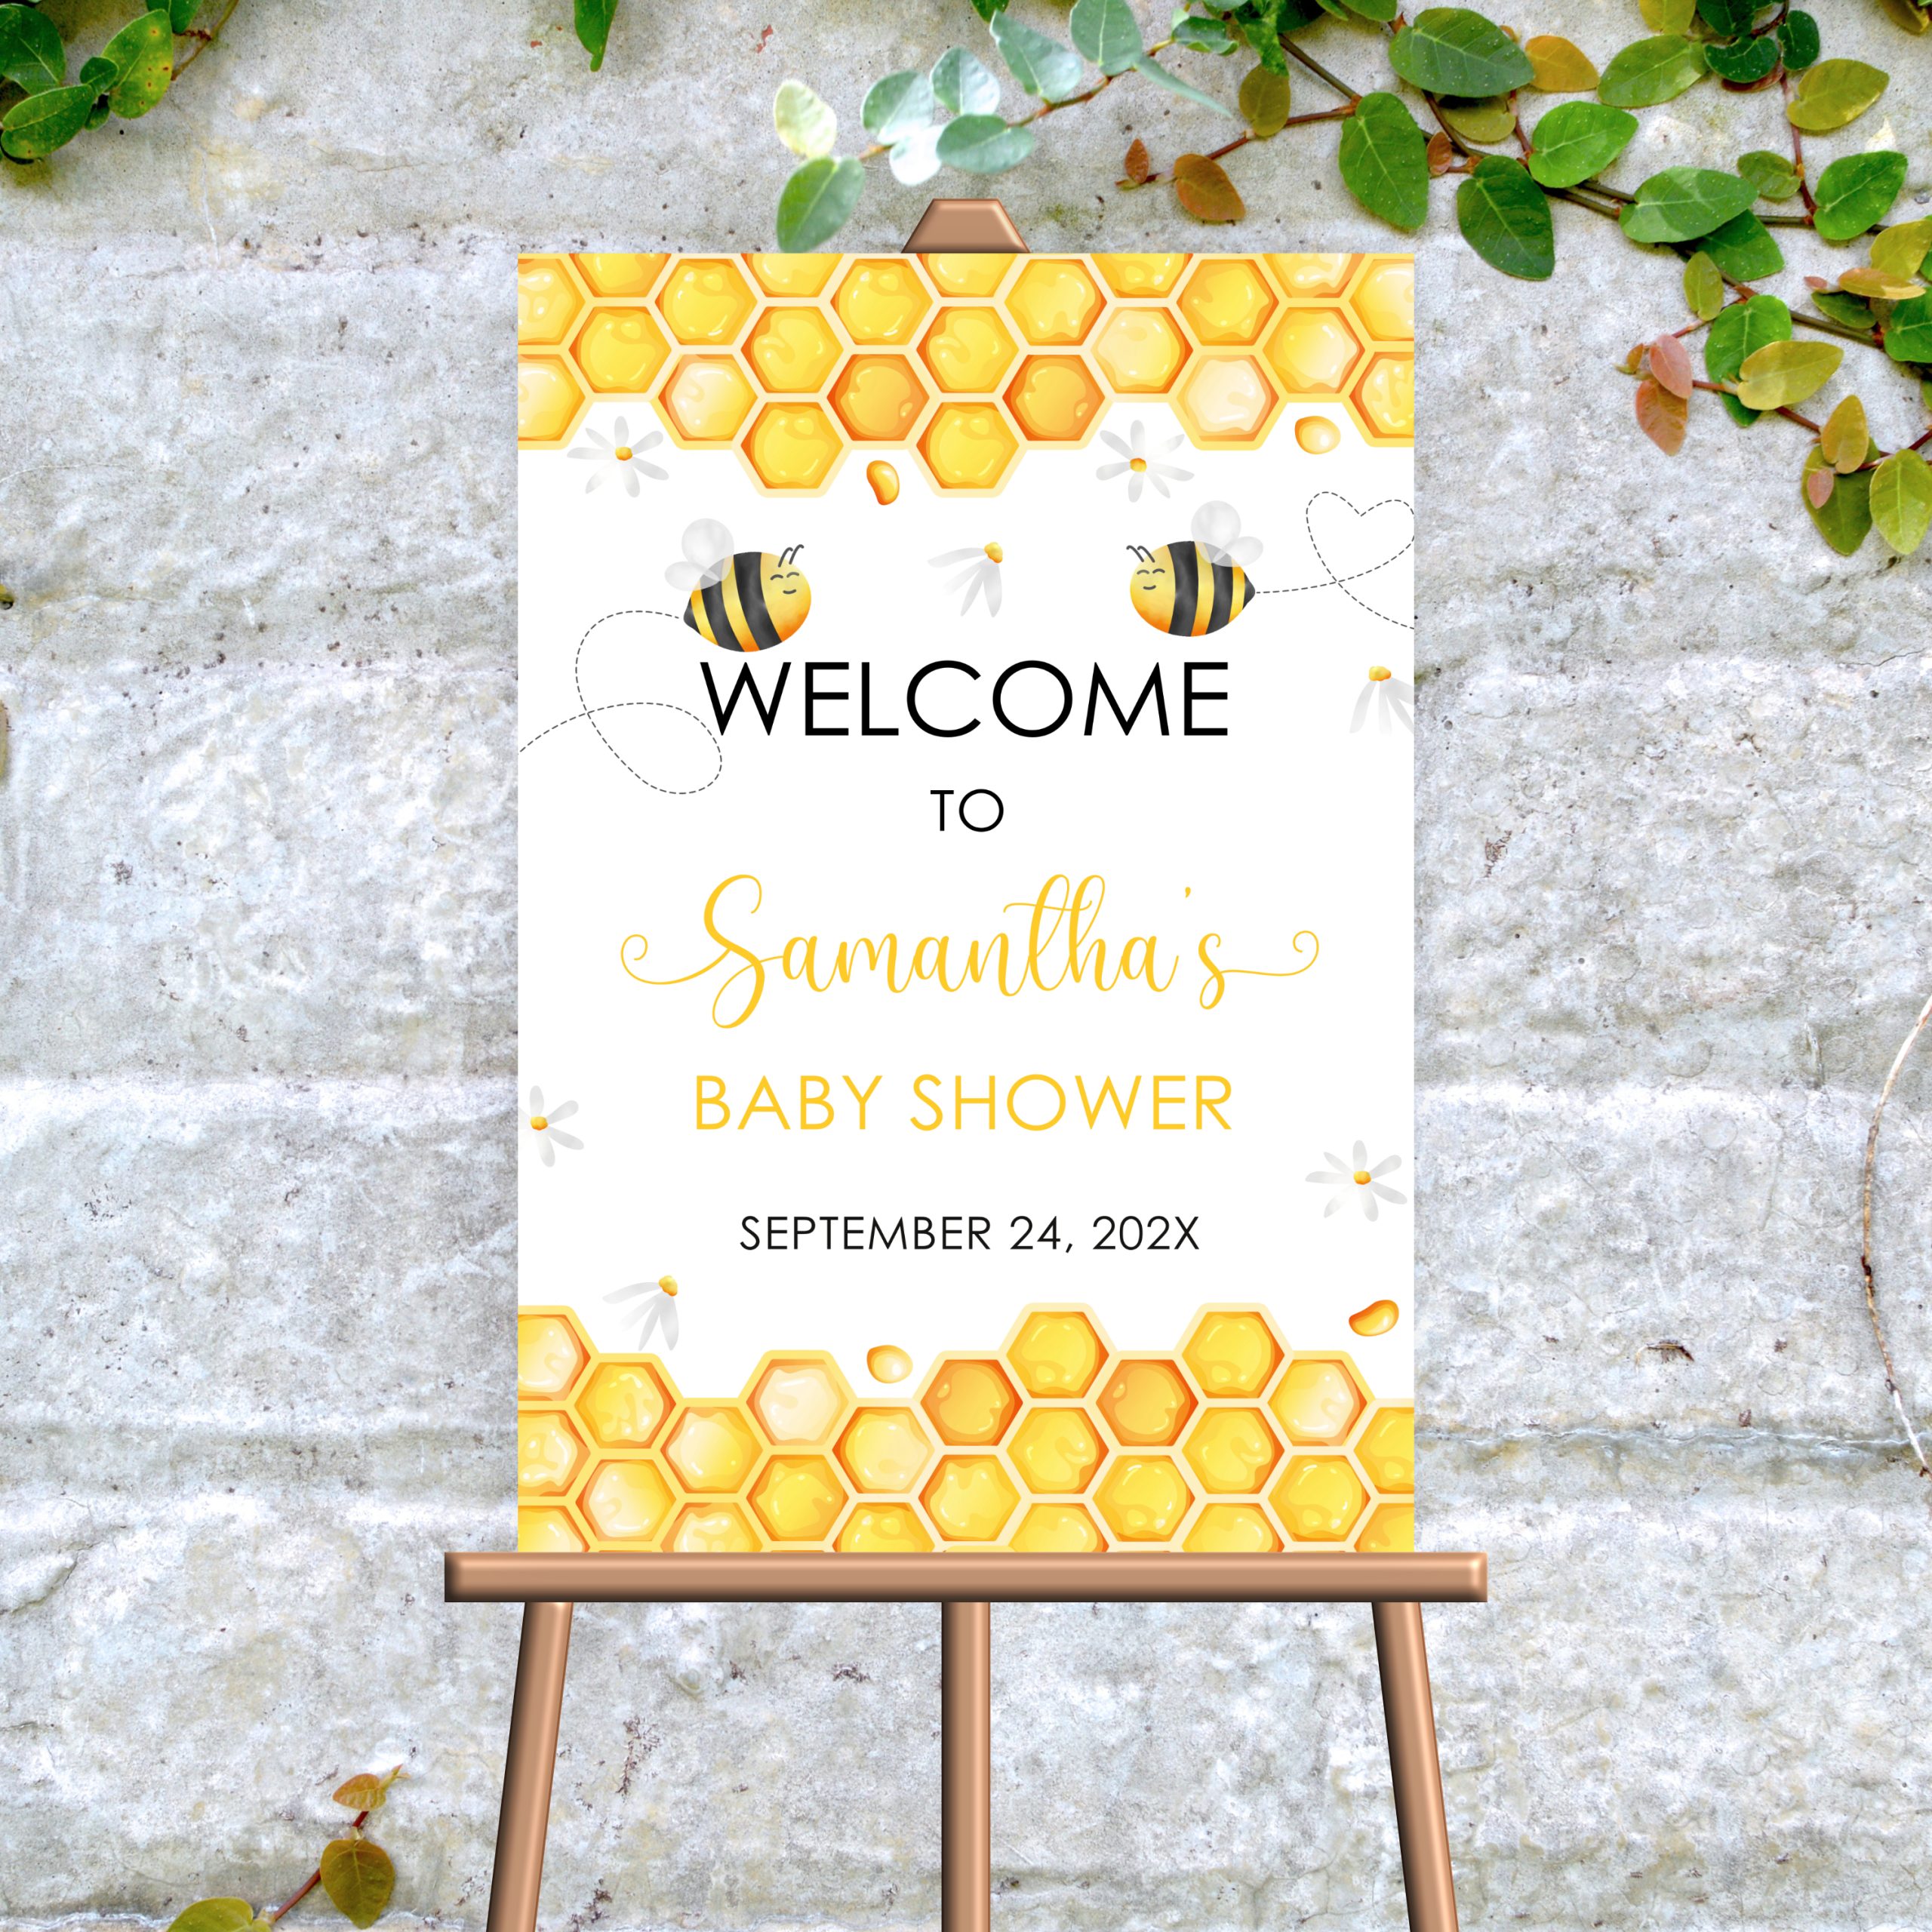 DECOR | SIGNS Editable Bee Welcome Sign, Honeycomb Daisy Baby Shower Welcome Sign, Baby Shower Welcome Sign with Bees